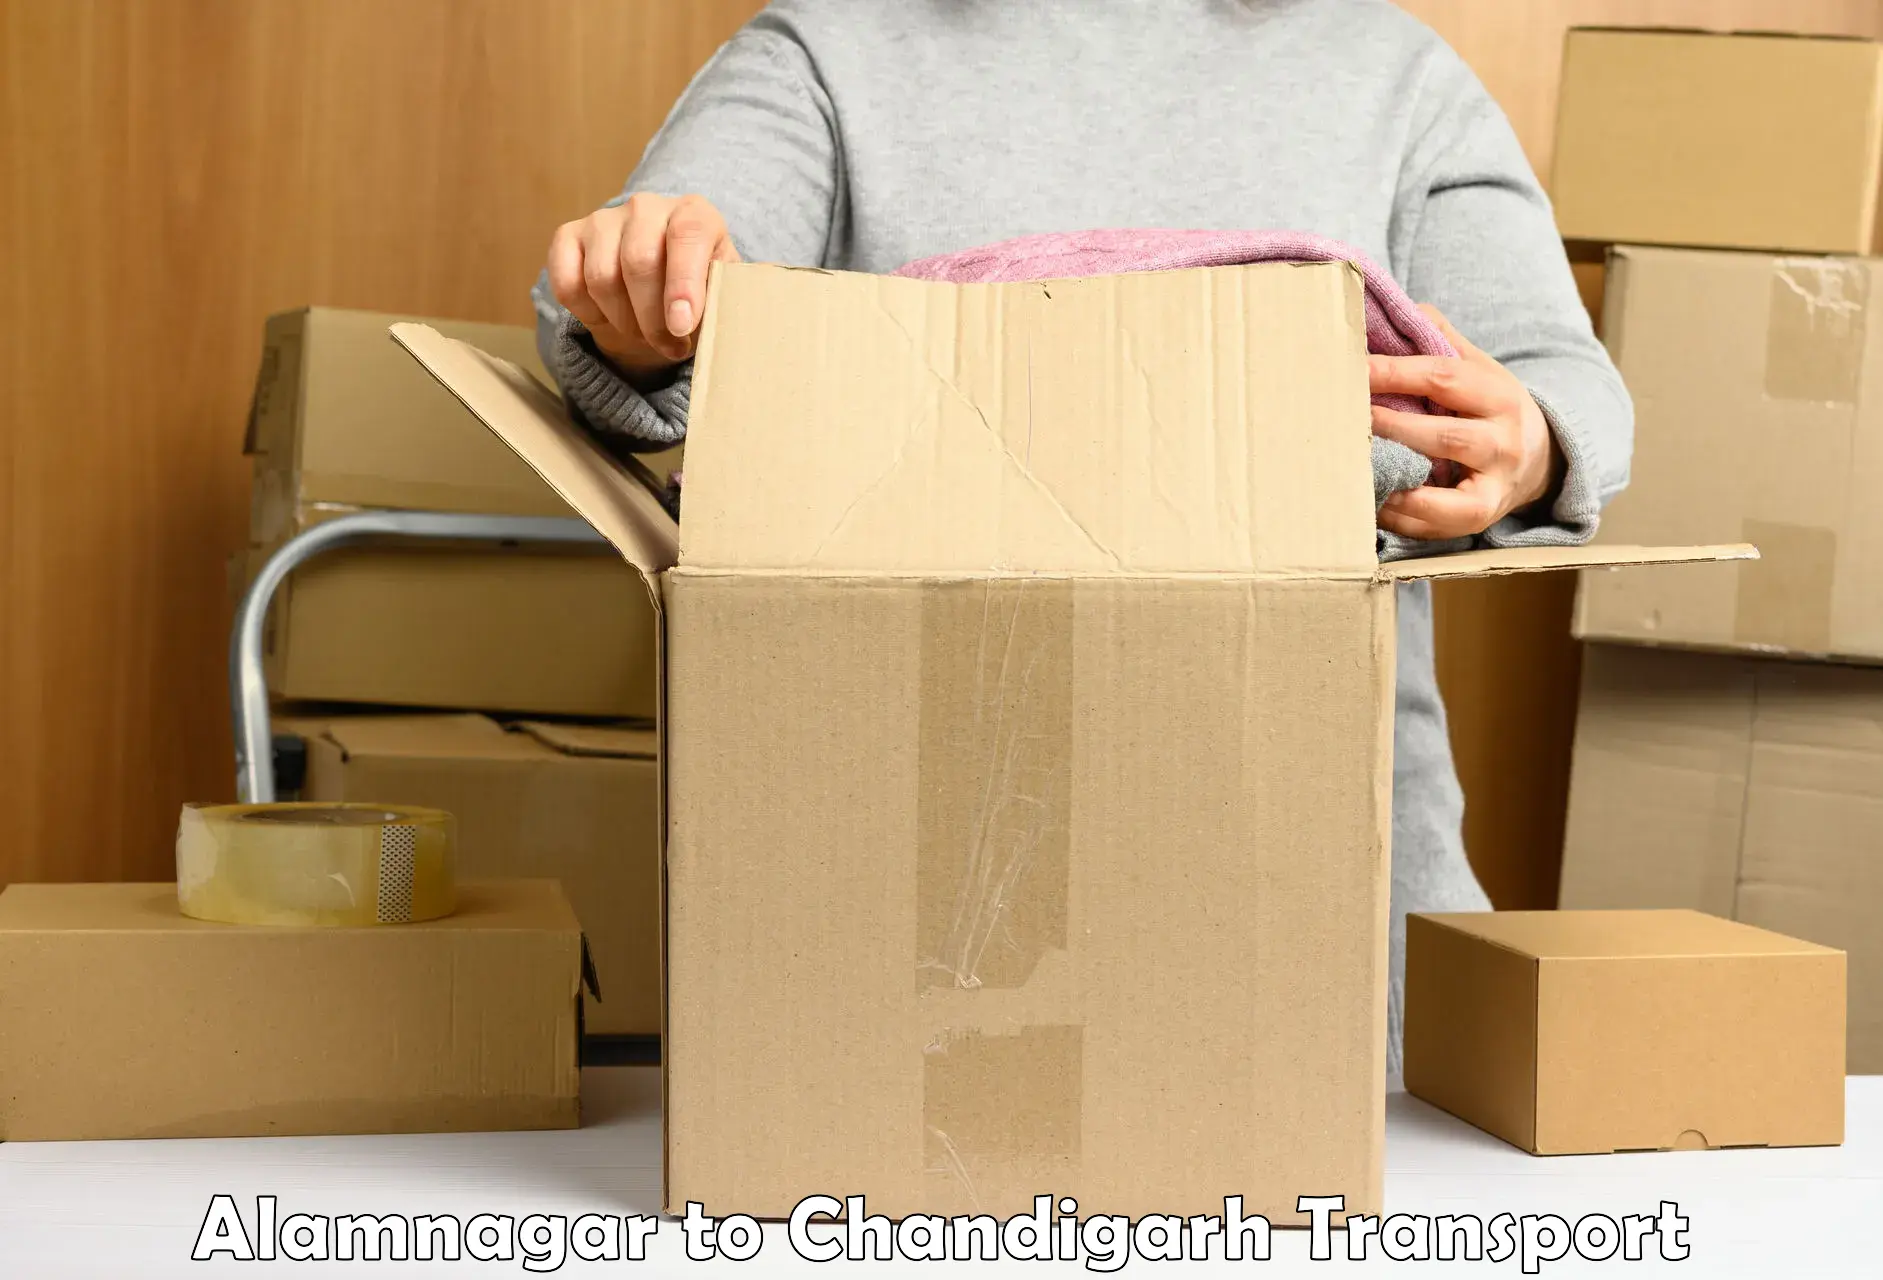 Daily parcel service transport in Alamnagar to Chandigarh